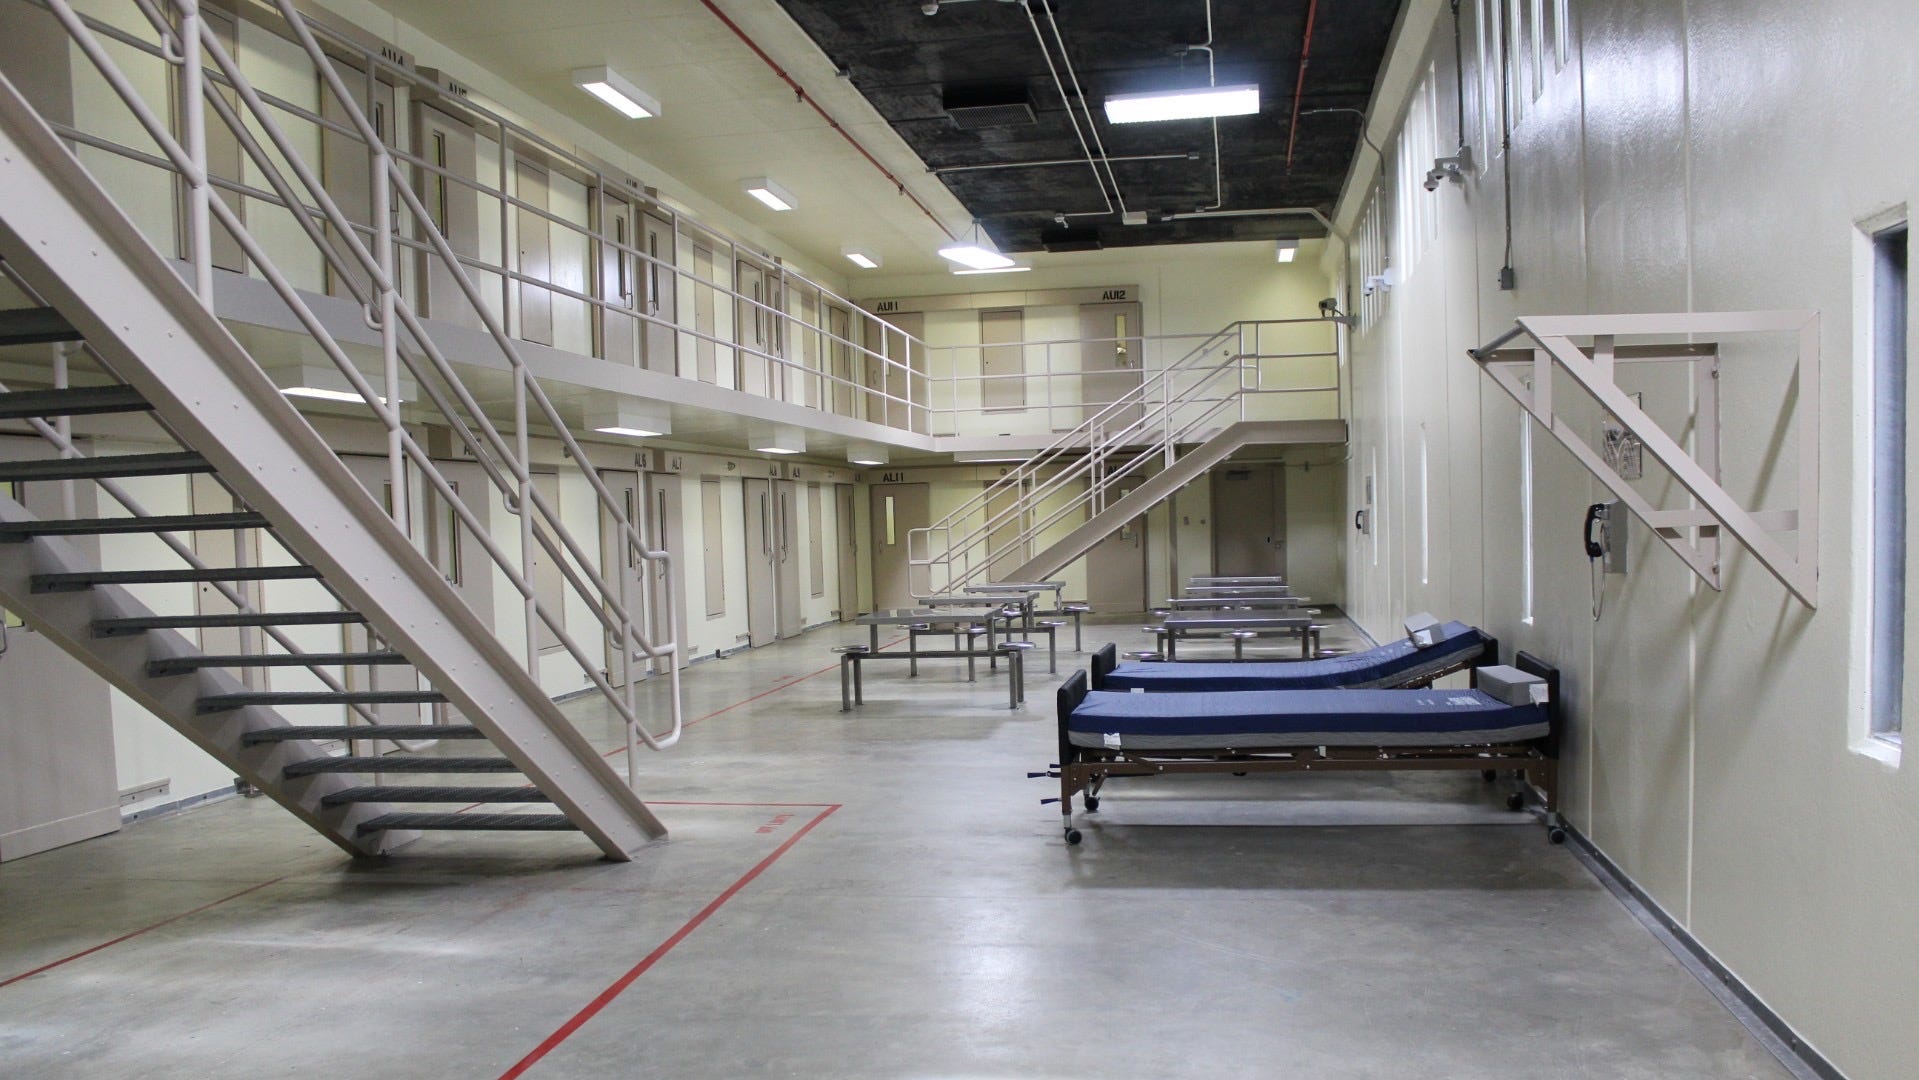 Department of Correction announces another inmate death, increase of cases